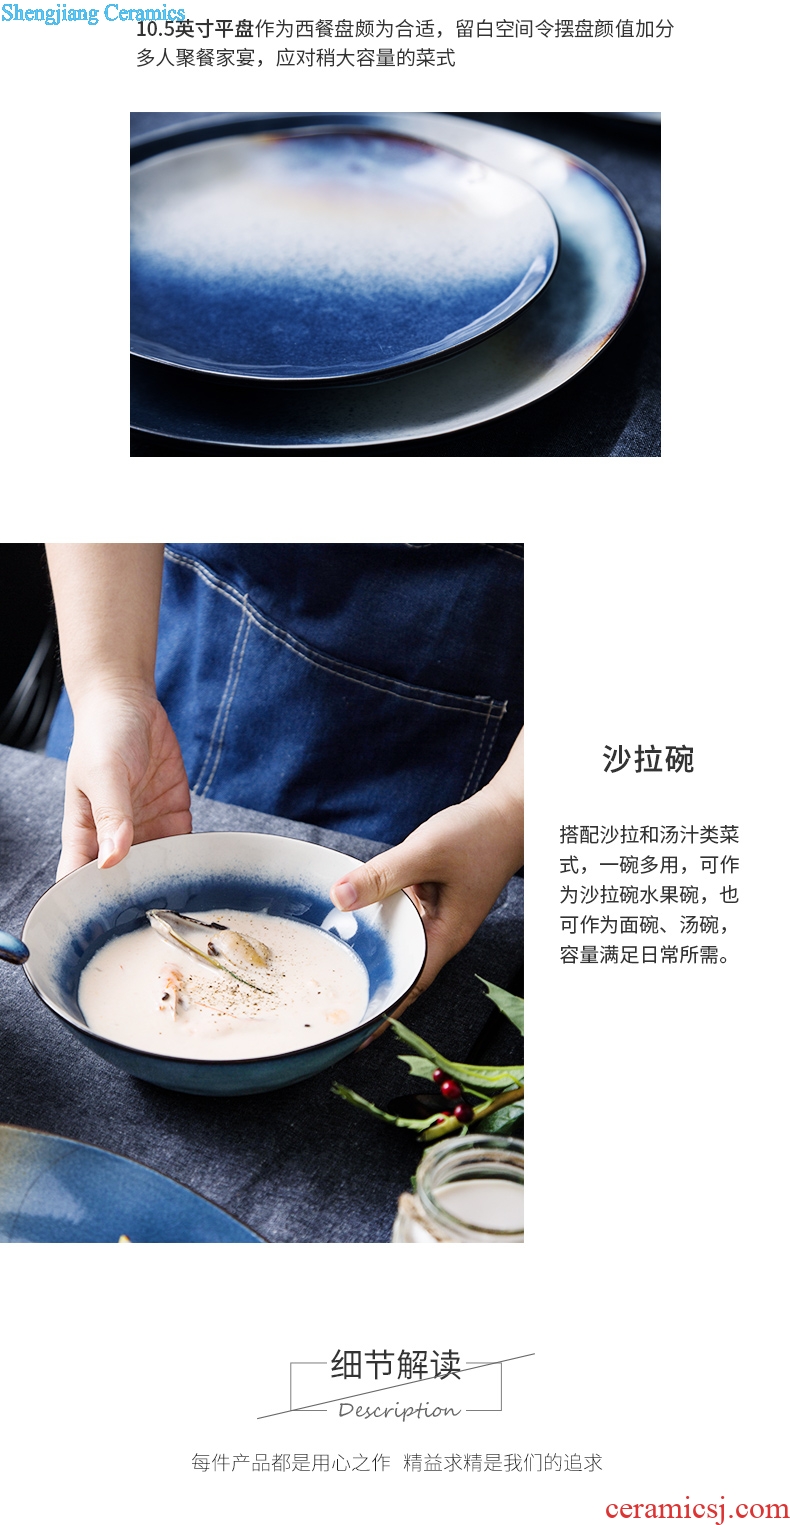 Ijarl million jia Nordic ins web celebrity dishes dishes and cutlery set new household ceramic bowl bowl Milky Way